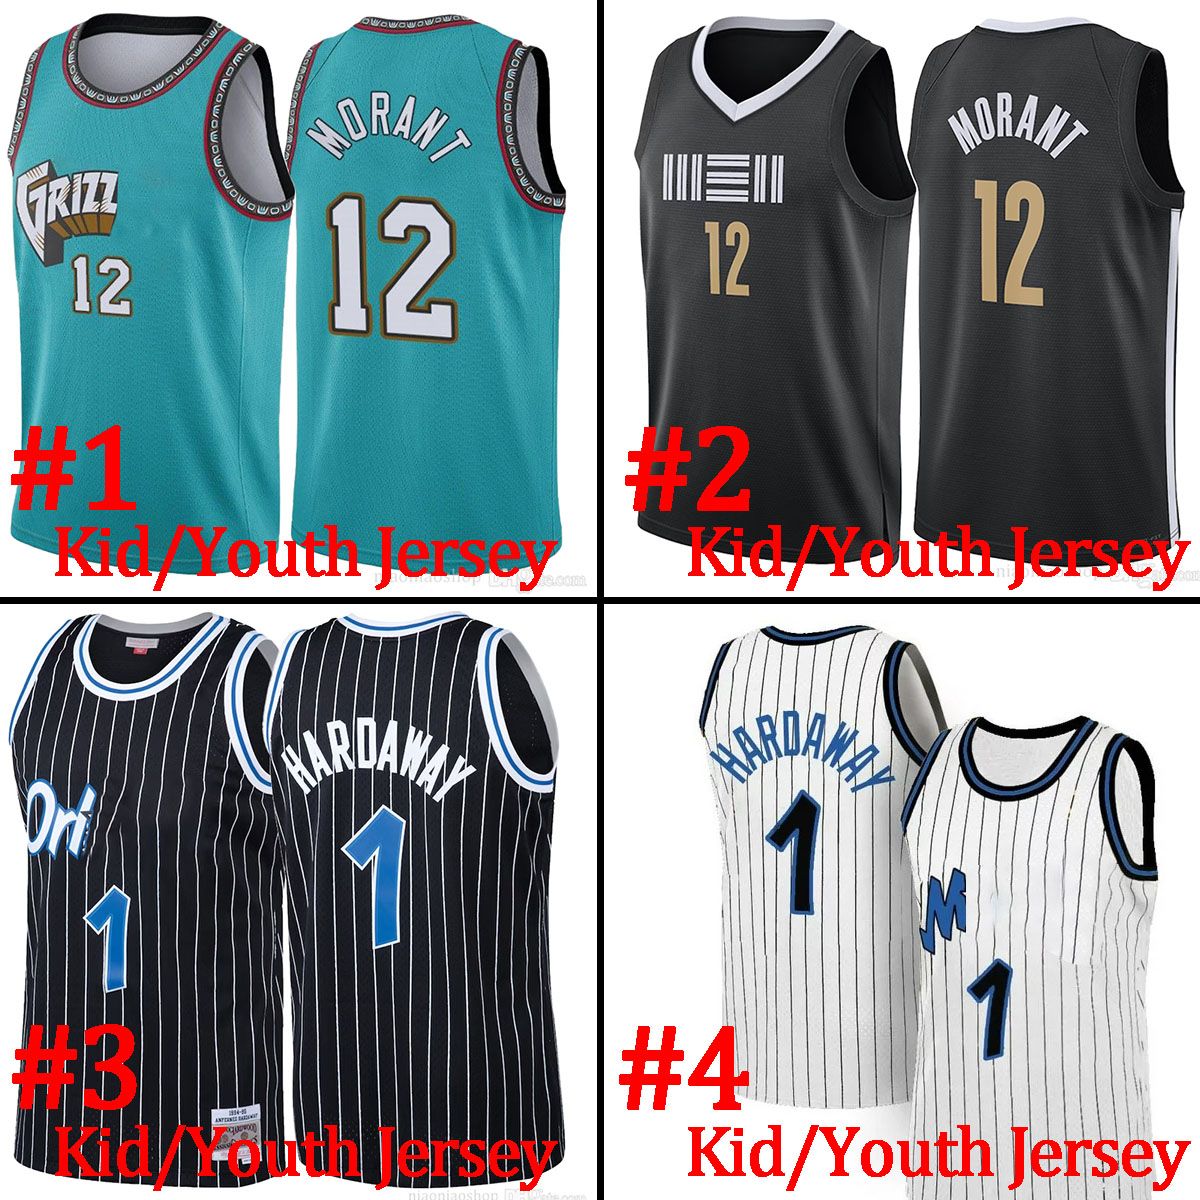 Youth/Kid Jersey-11